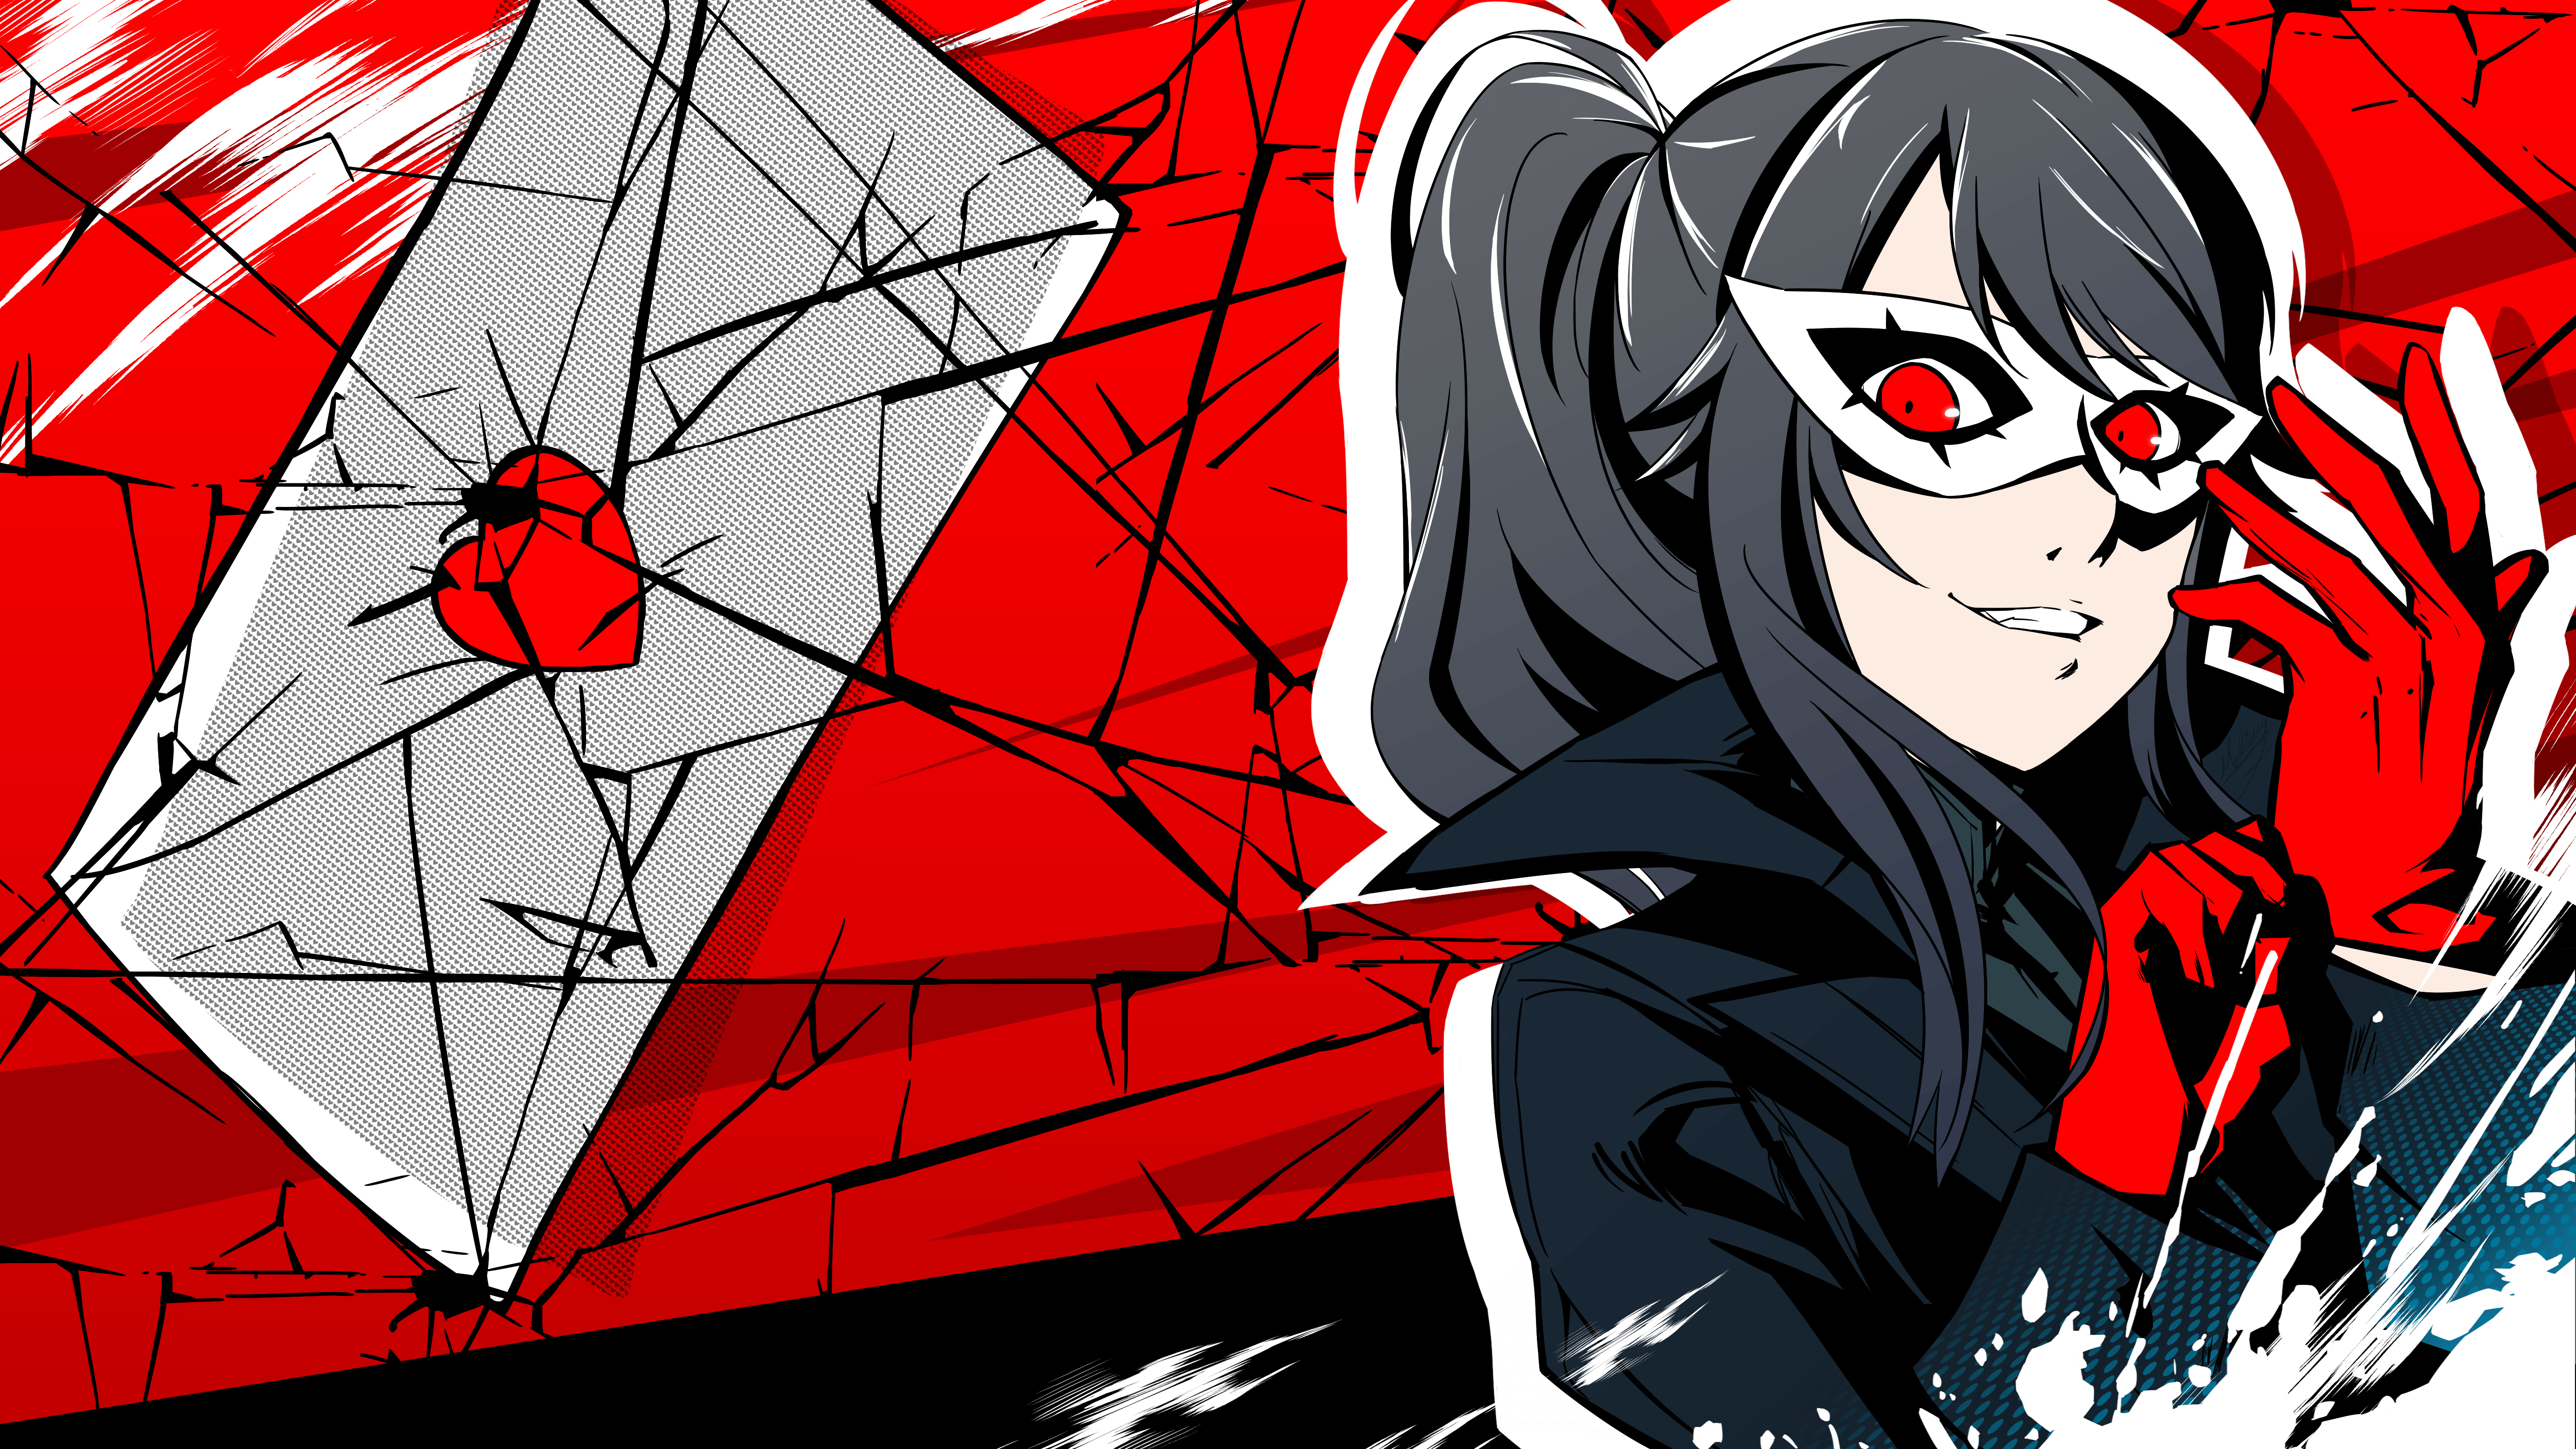 Yandere Simulator has a Persona themed wallpaper on their